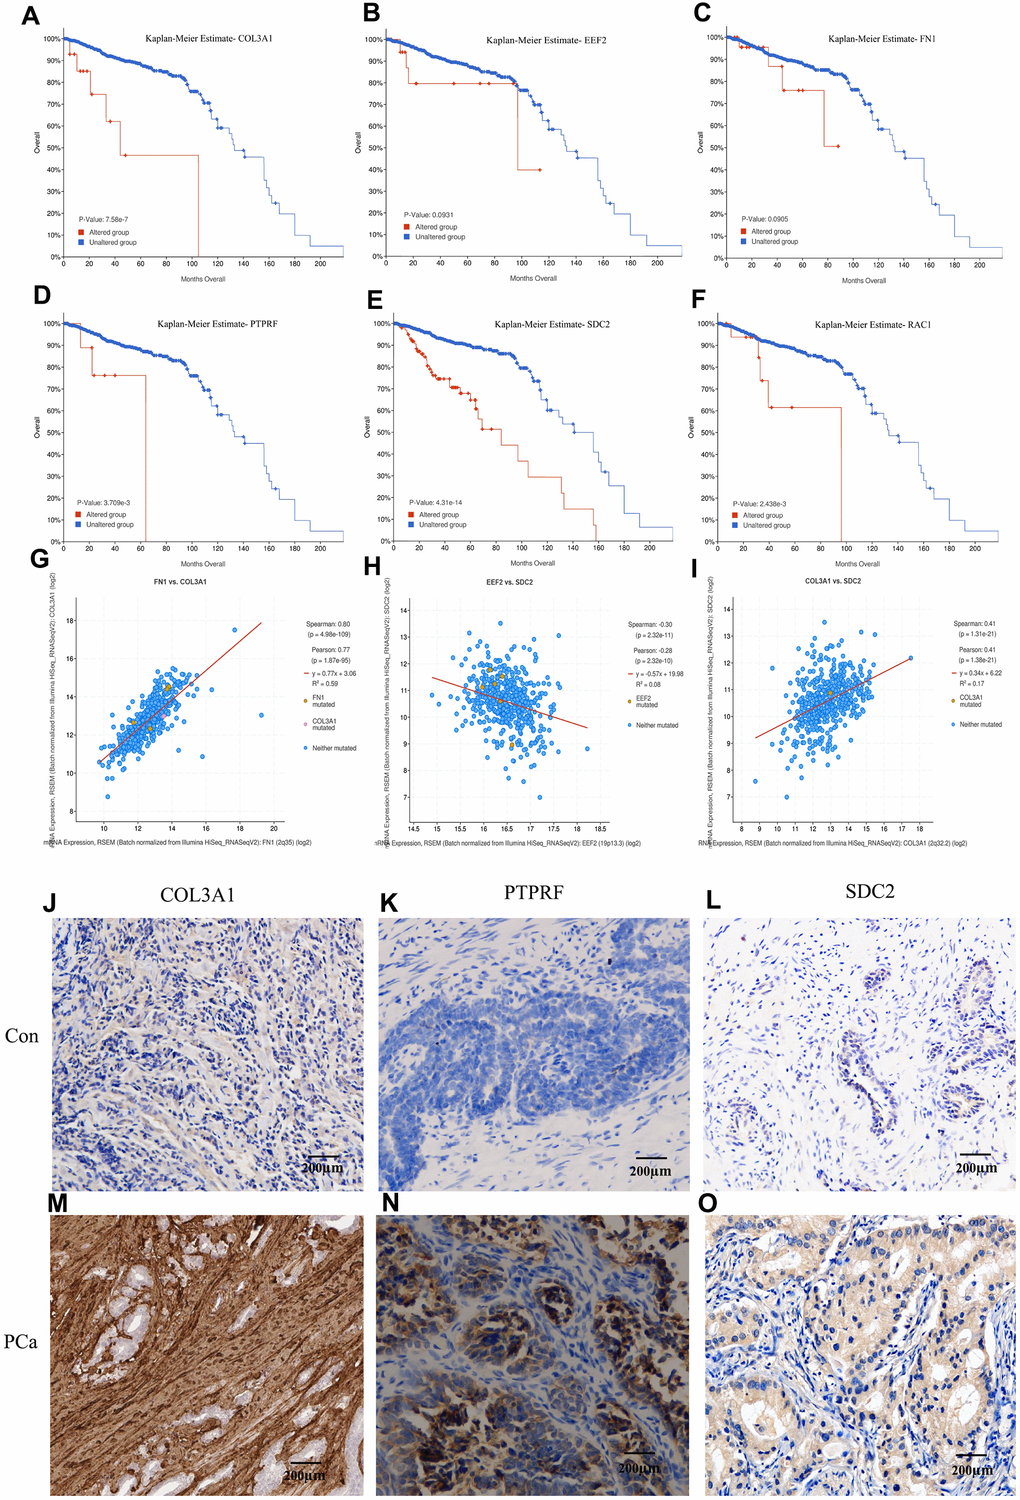 Kaplan-Meier estimation of the overall survival and identification of the key molecules by immunohistochemistry in patients samples. Overall survival analysis of COL3A1 (A), EEF2 (B), FN1 (C), PTPRF (D), SDC2 (E), and RAC1 (F). Expression linear correlations between FN1 vs. COL3A1 (G), EEF2 vs. SDC2 (H), and COL3A1 vs. SDC2 (I). (J–O) Detection of COL3A1, PTPRF, and SDC2 expression by immunohistochemistry in representative BM PCa and controls.